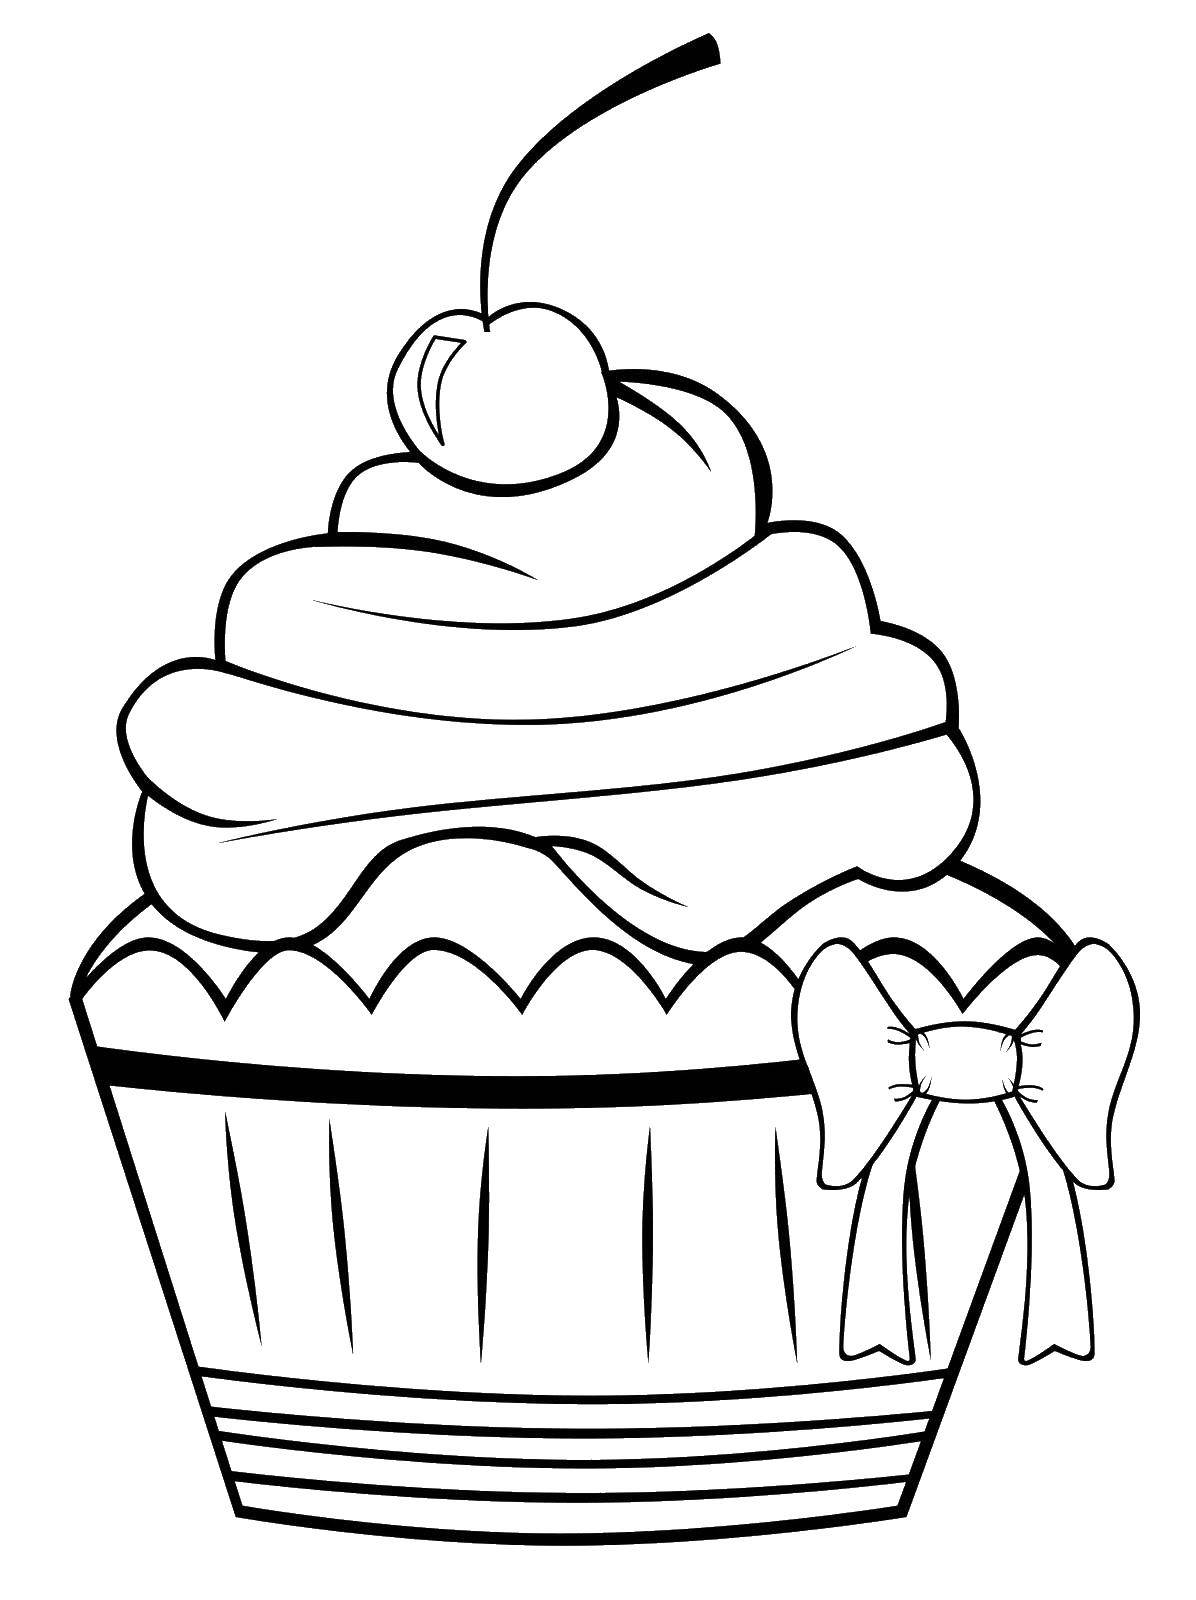 Coloring Cupcake with cream. Category The food. Tags:  food, cupcakes, cream.